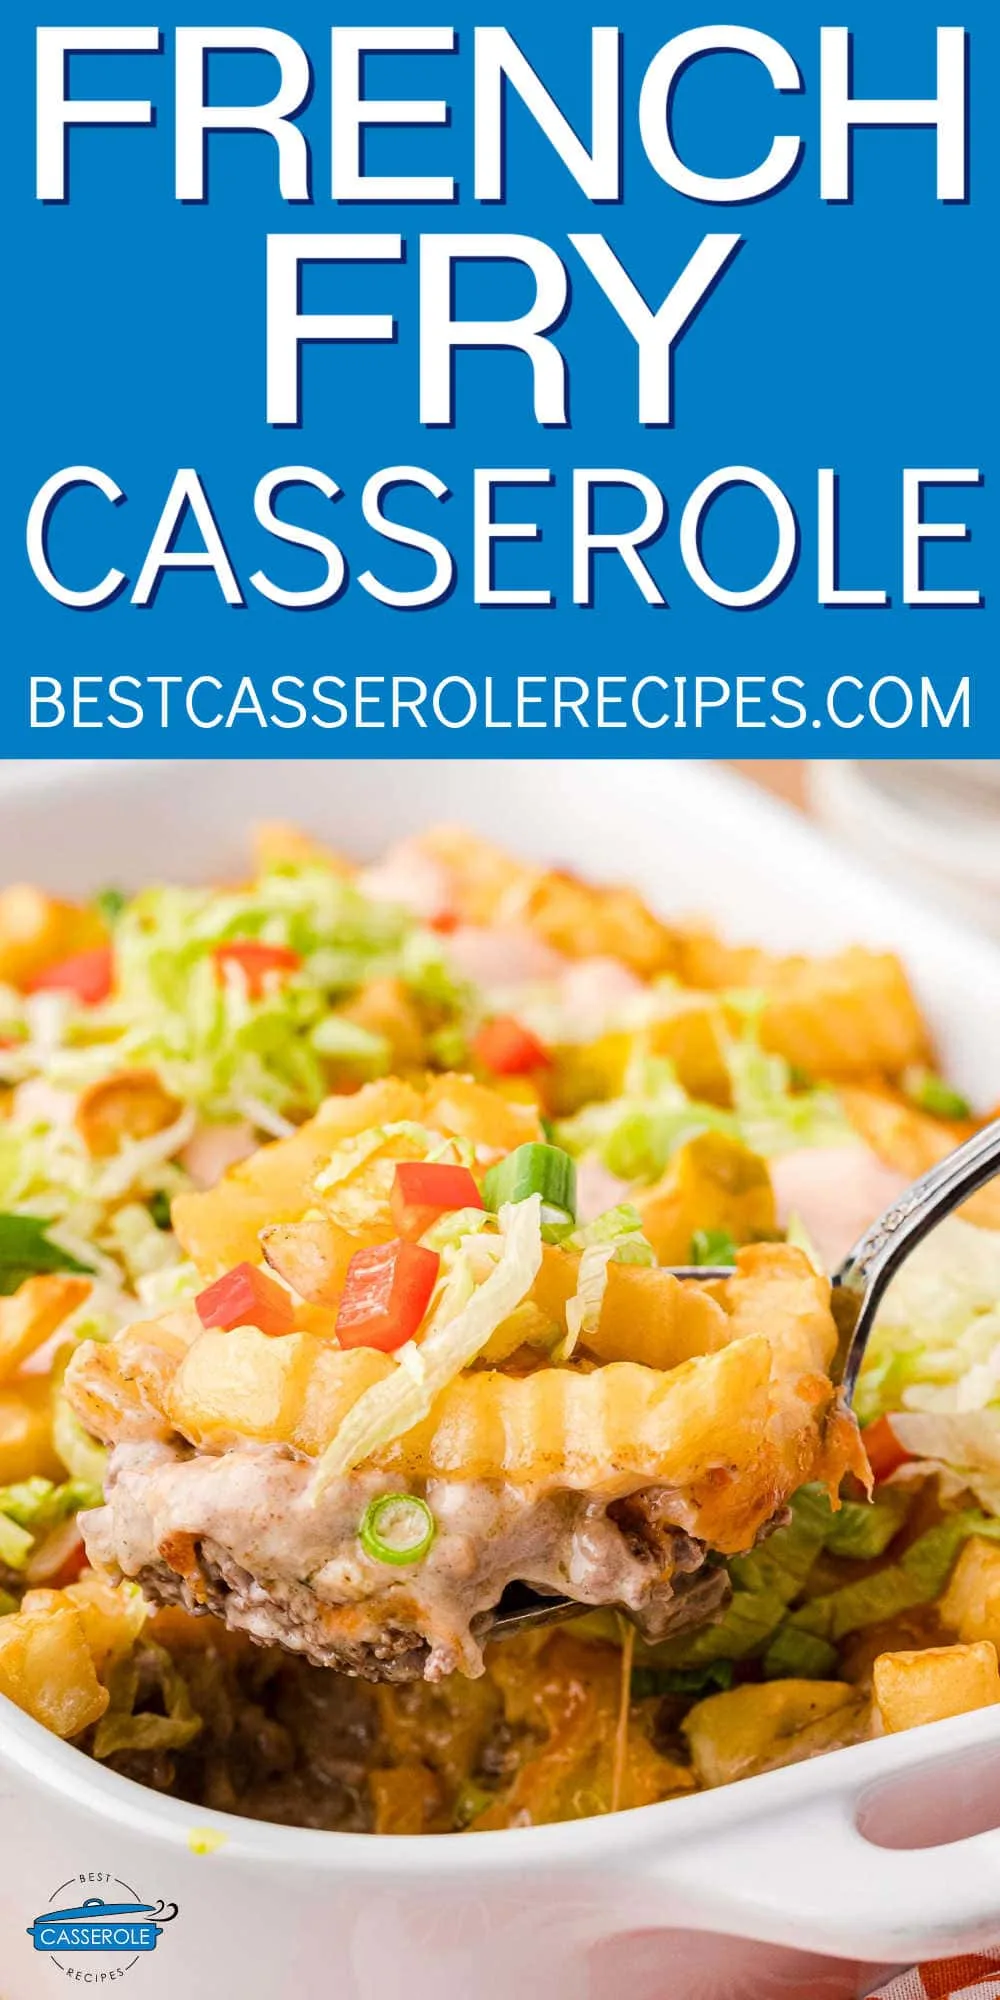 scoop of french fry casserole with blue banner and white text